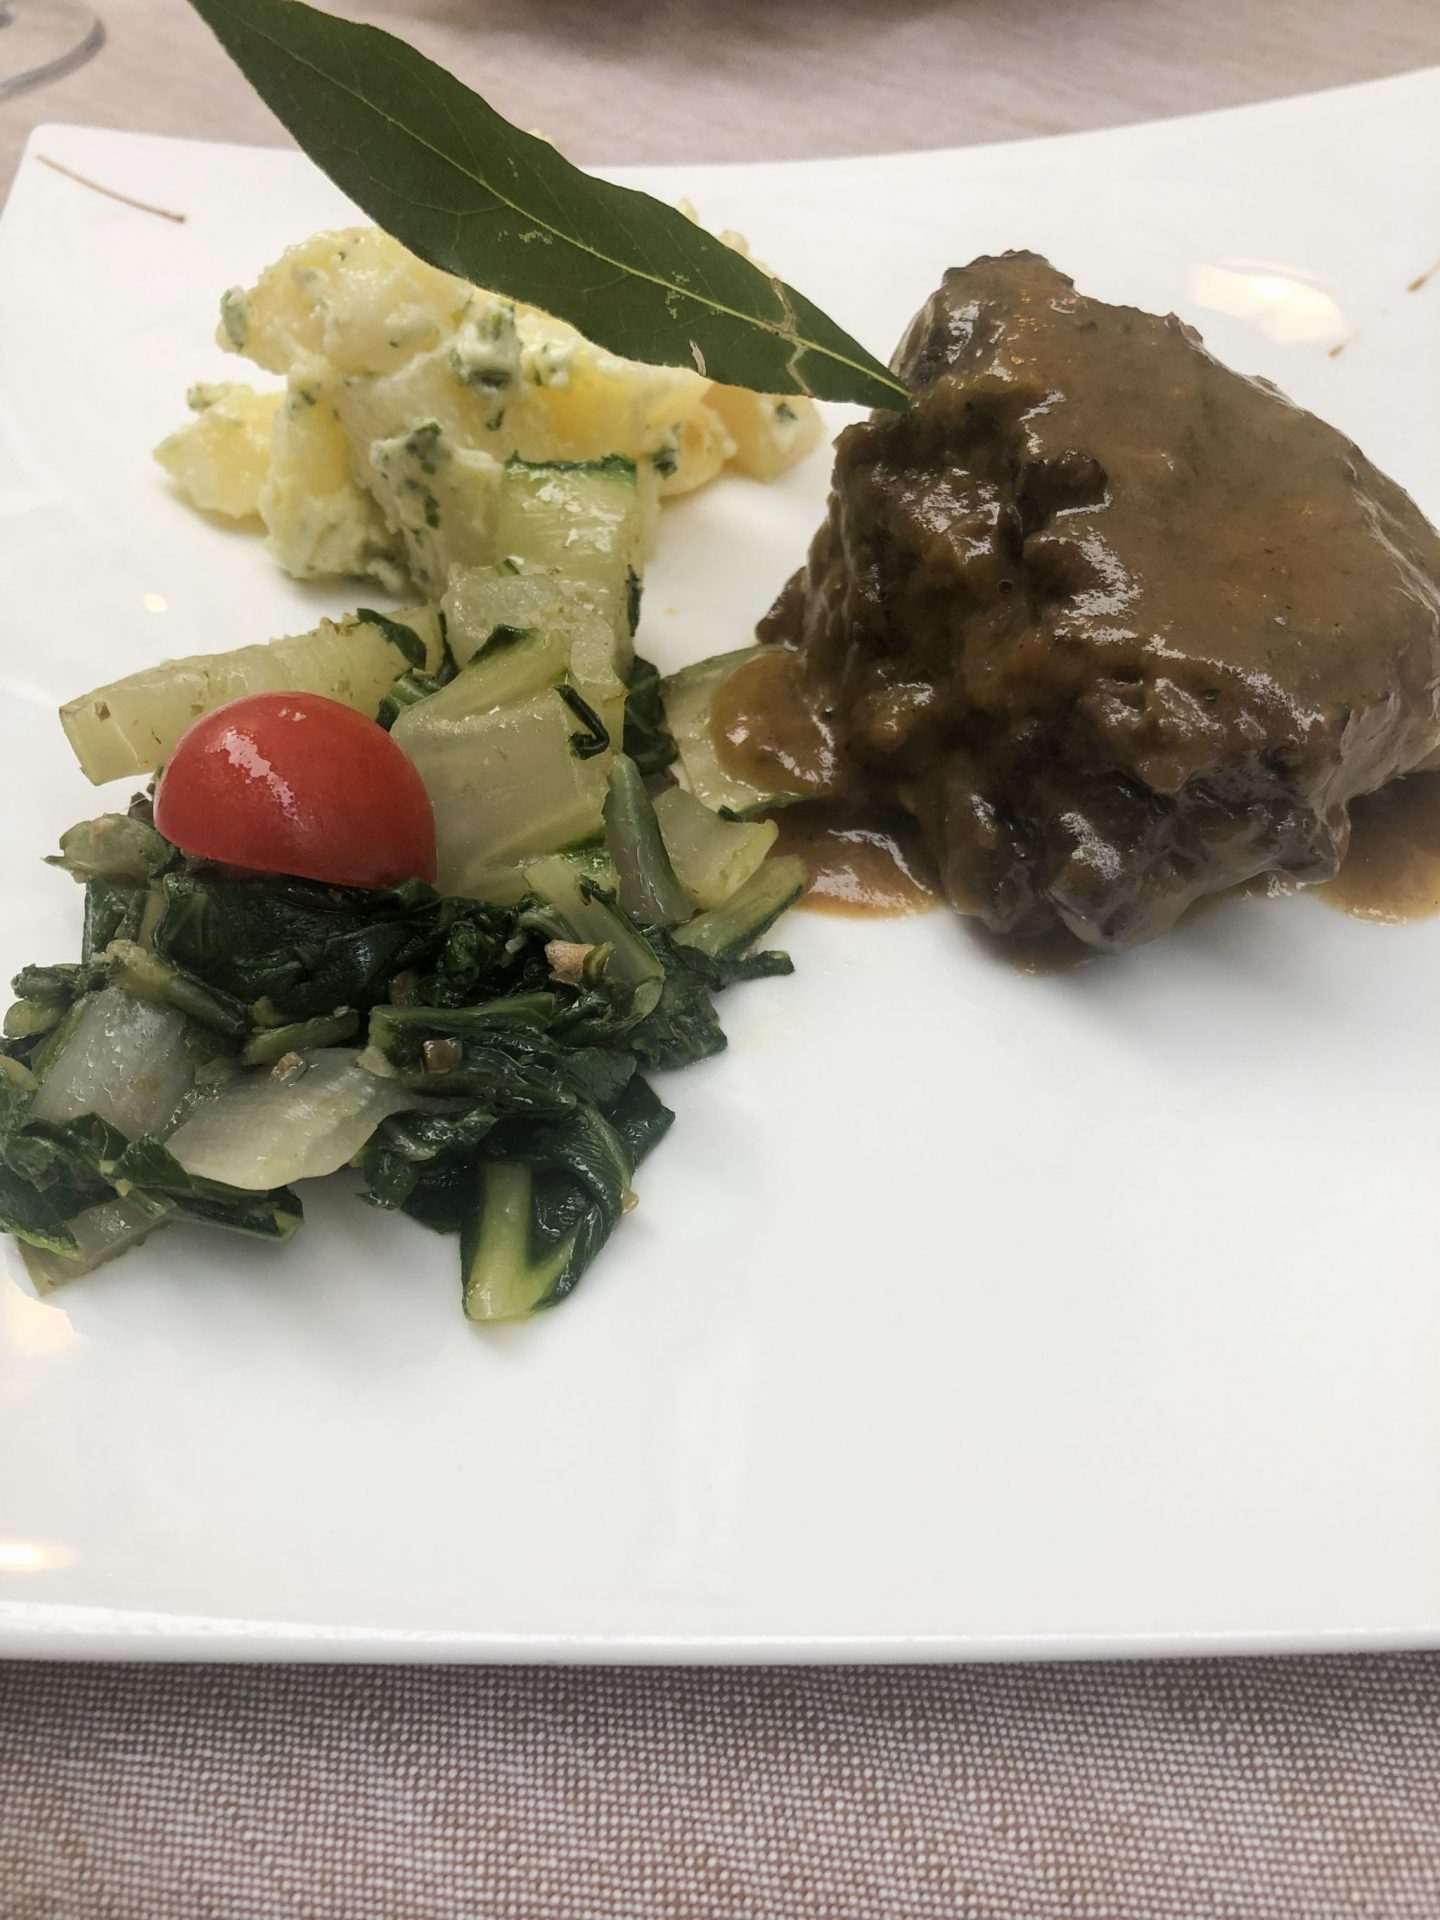 plate of calf cheek with potatoes and green vegetables in Trento, Trentino